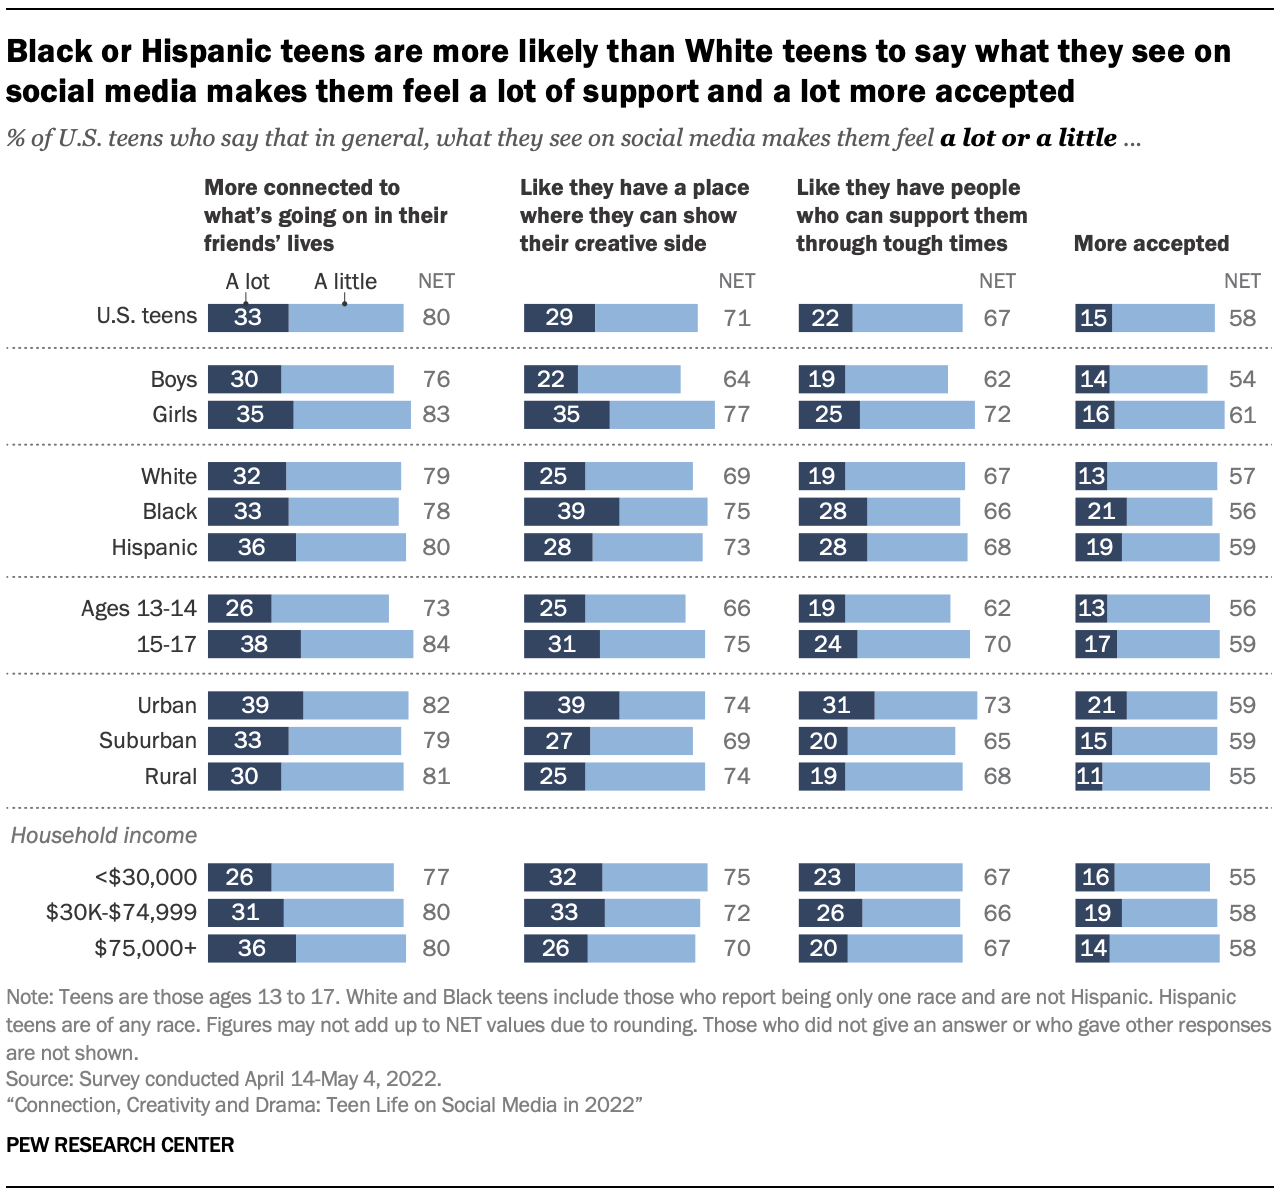 Black or Hispanic teens are more likely than White teens to say what they see on social media makes them feel a lot of support and a lot more accepted